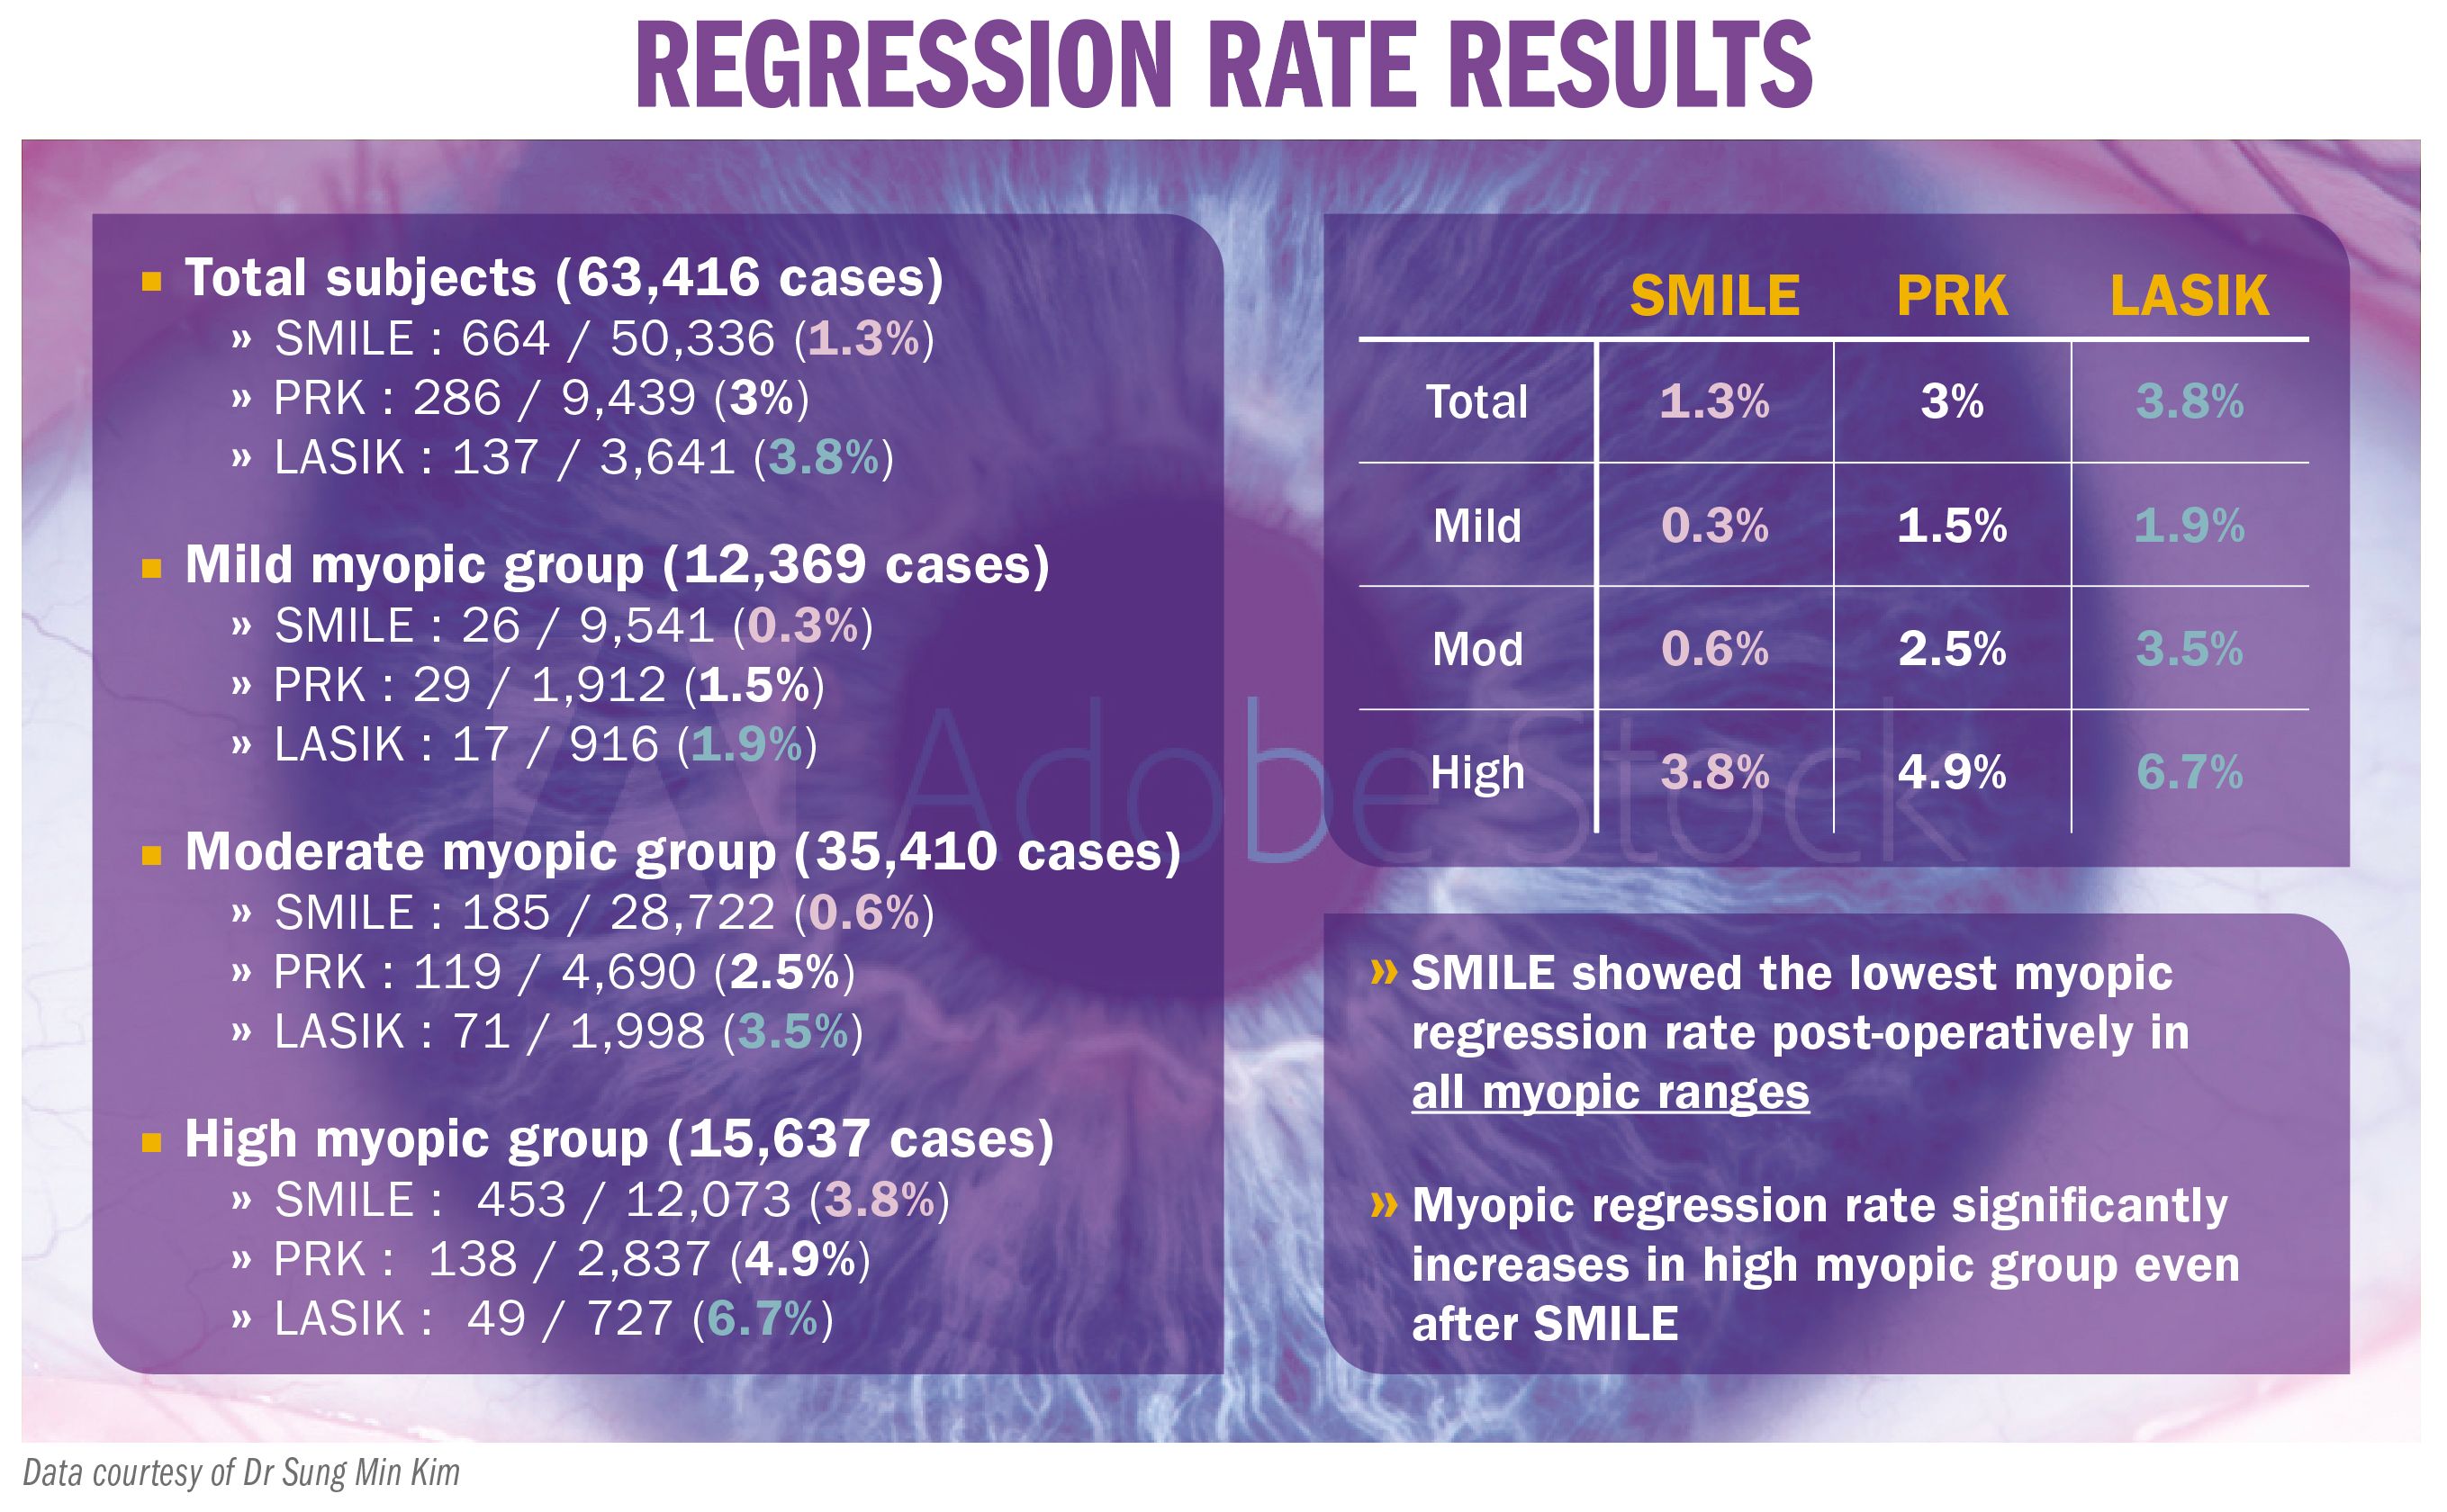 Chart showing SMILE, PRK and LASIK progression results